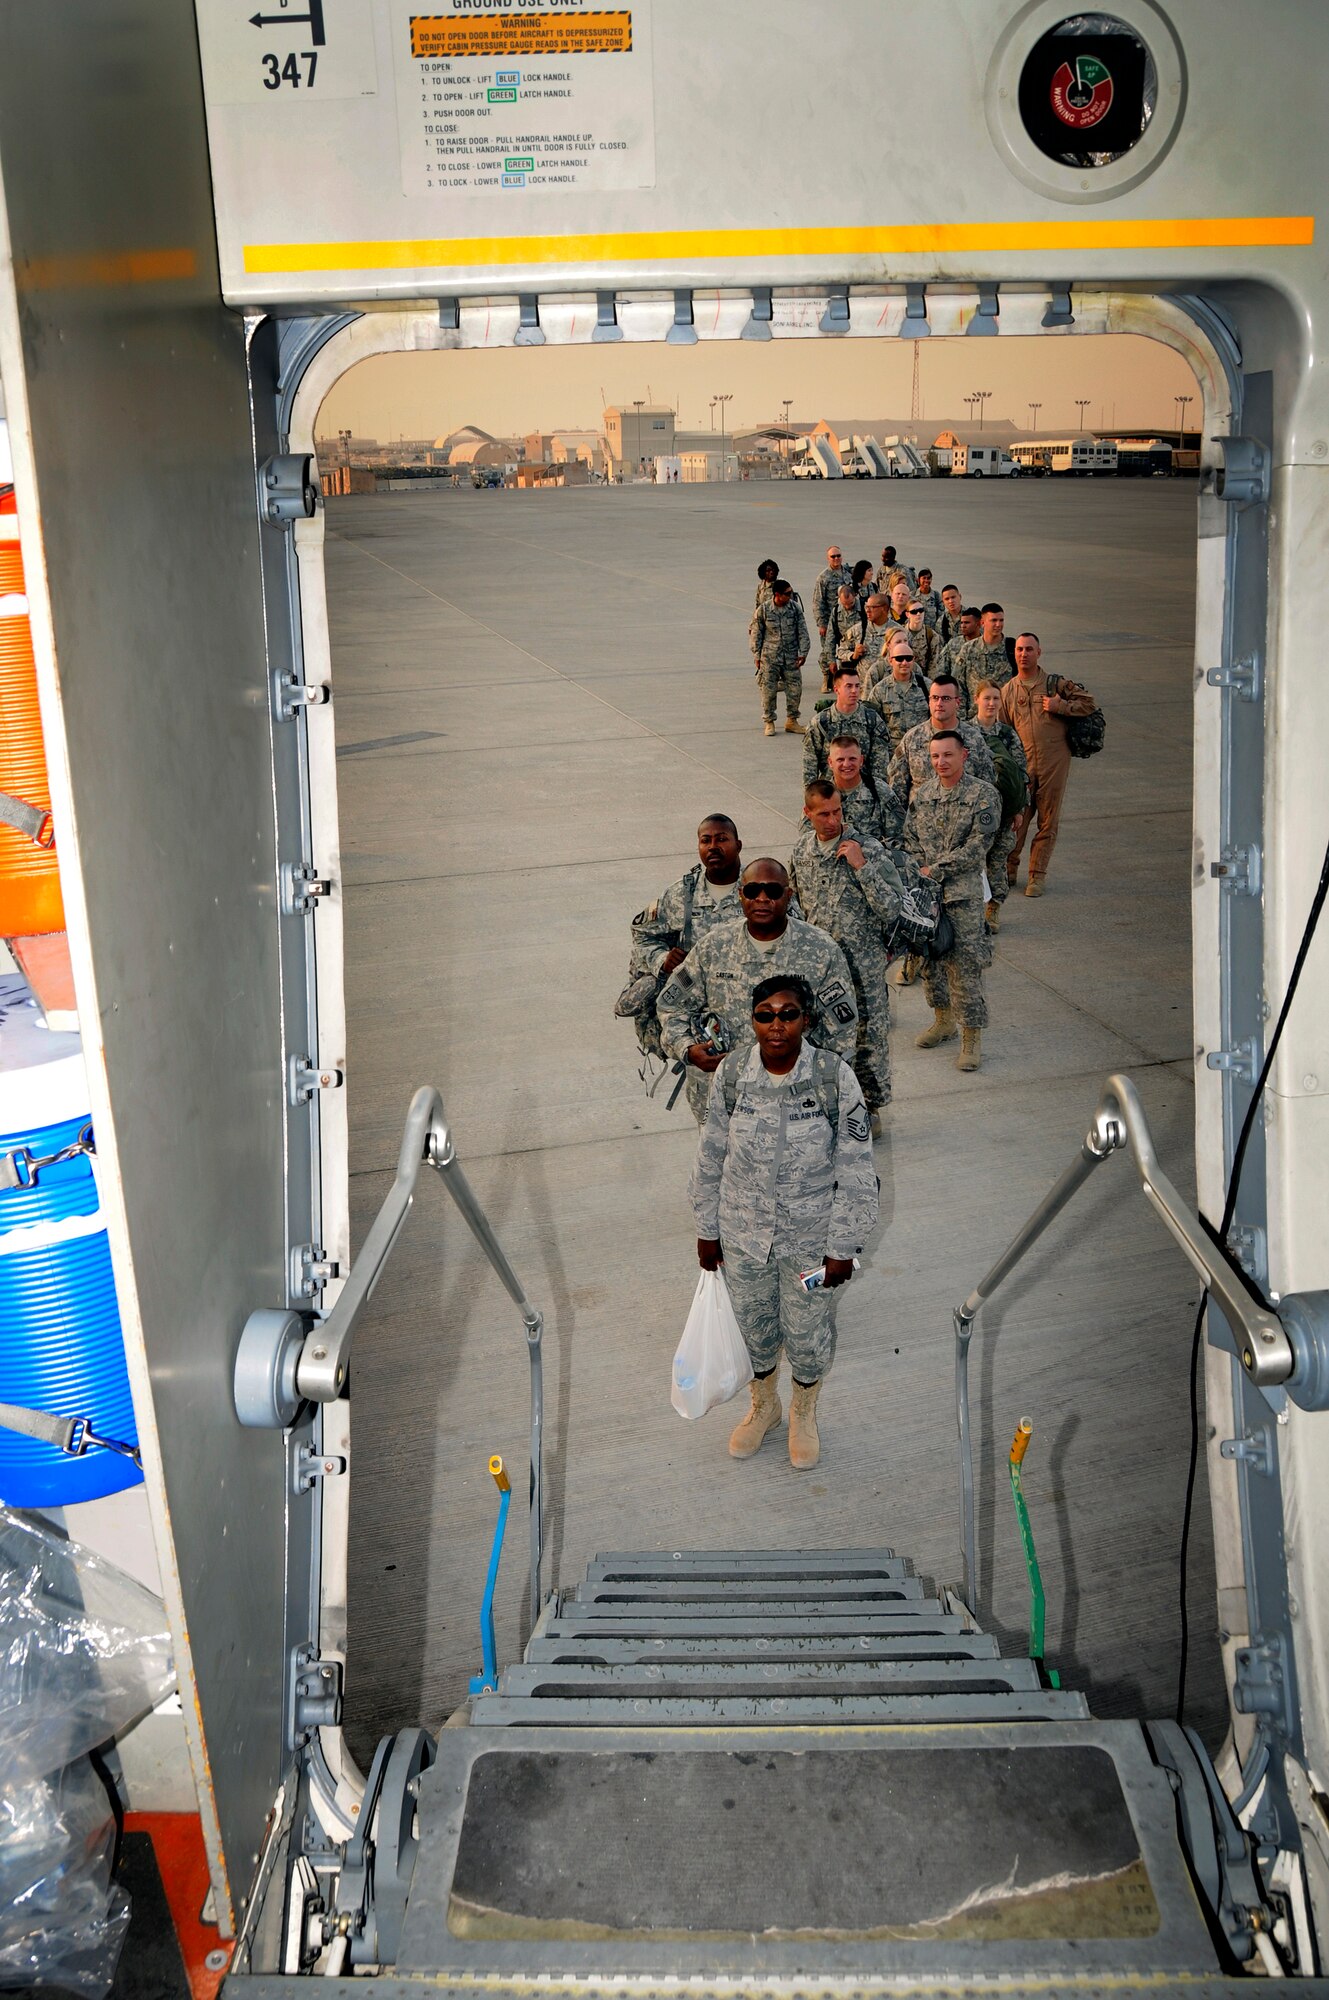 Passengers line up to board a C-17 Globemaster III for transport to destinations within the U.S. Central Command’s area of responsibility Aug. 27, 2008, at an undisclosed air base in Southwest Asia.  The C-17 is the U.S. Air Force's premier airlifter and is responsible for transporting equipment, supplies and personnel throughout the theater of operations, supporting Operations Iraqi and Enduring Freedom and Joint Task Force-Horn of Africa.  (U.S. Air Force photo by Tech. Sgt. Michael Boquette/Released)